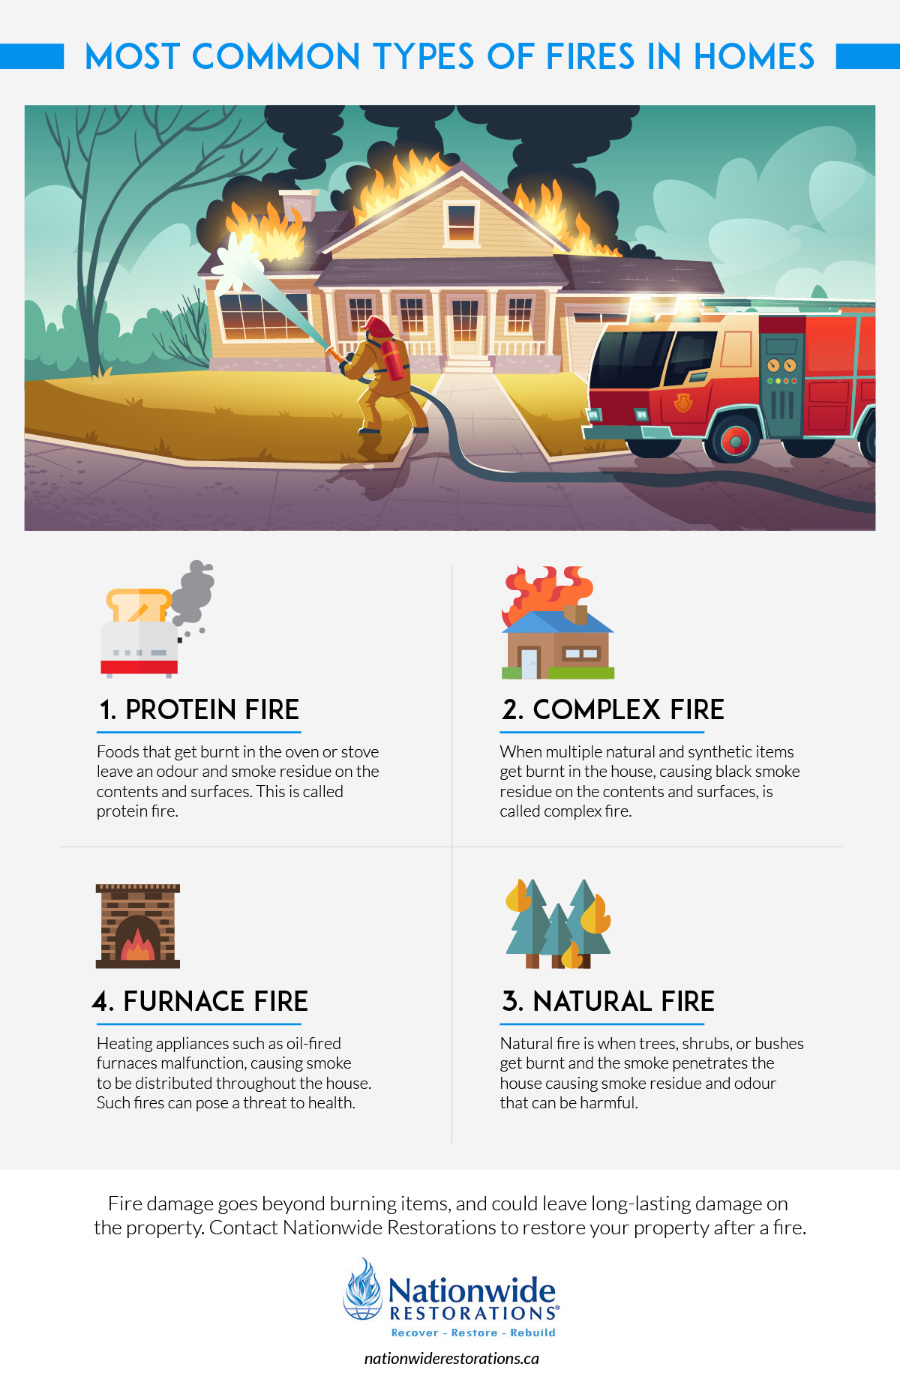 Most Common Types Of Fires in Homes